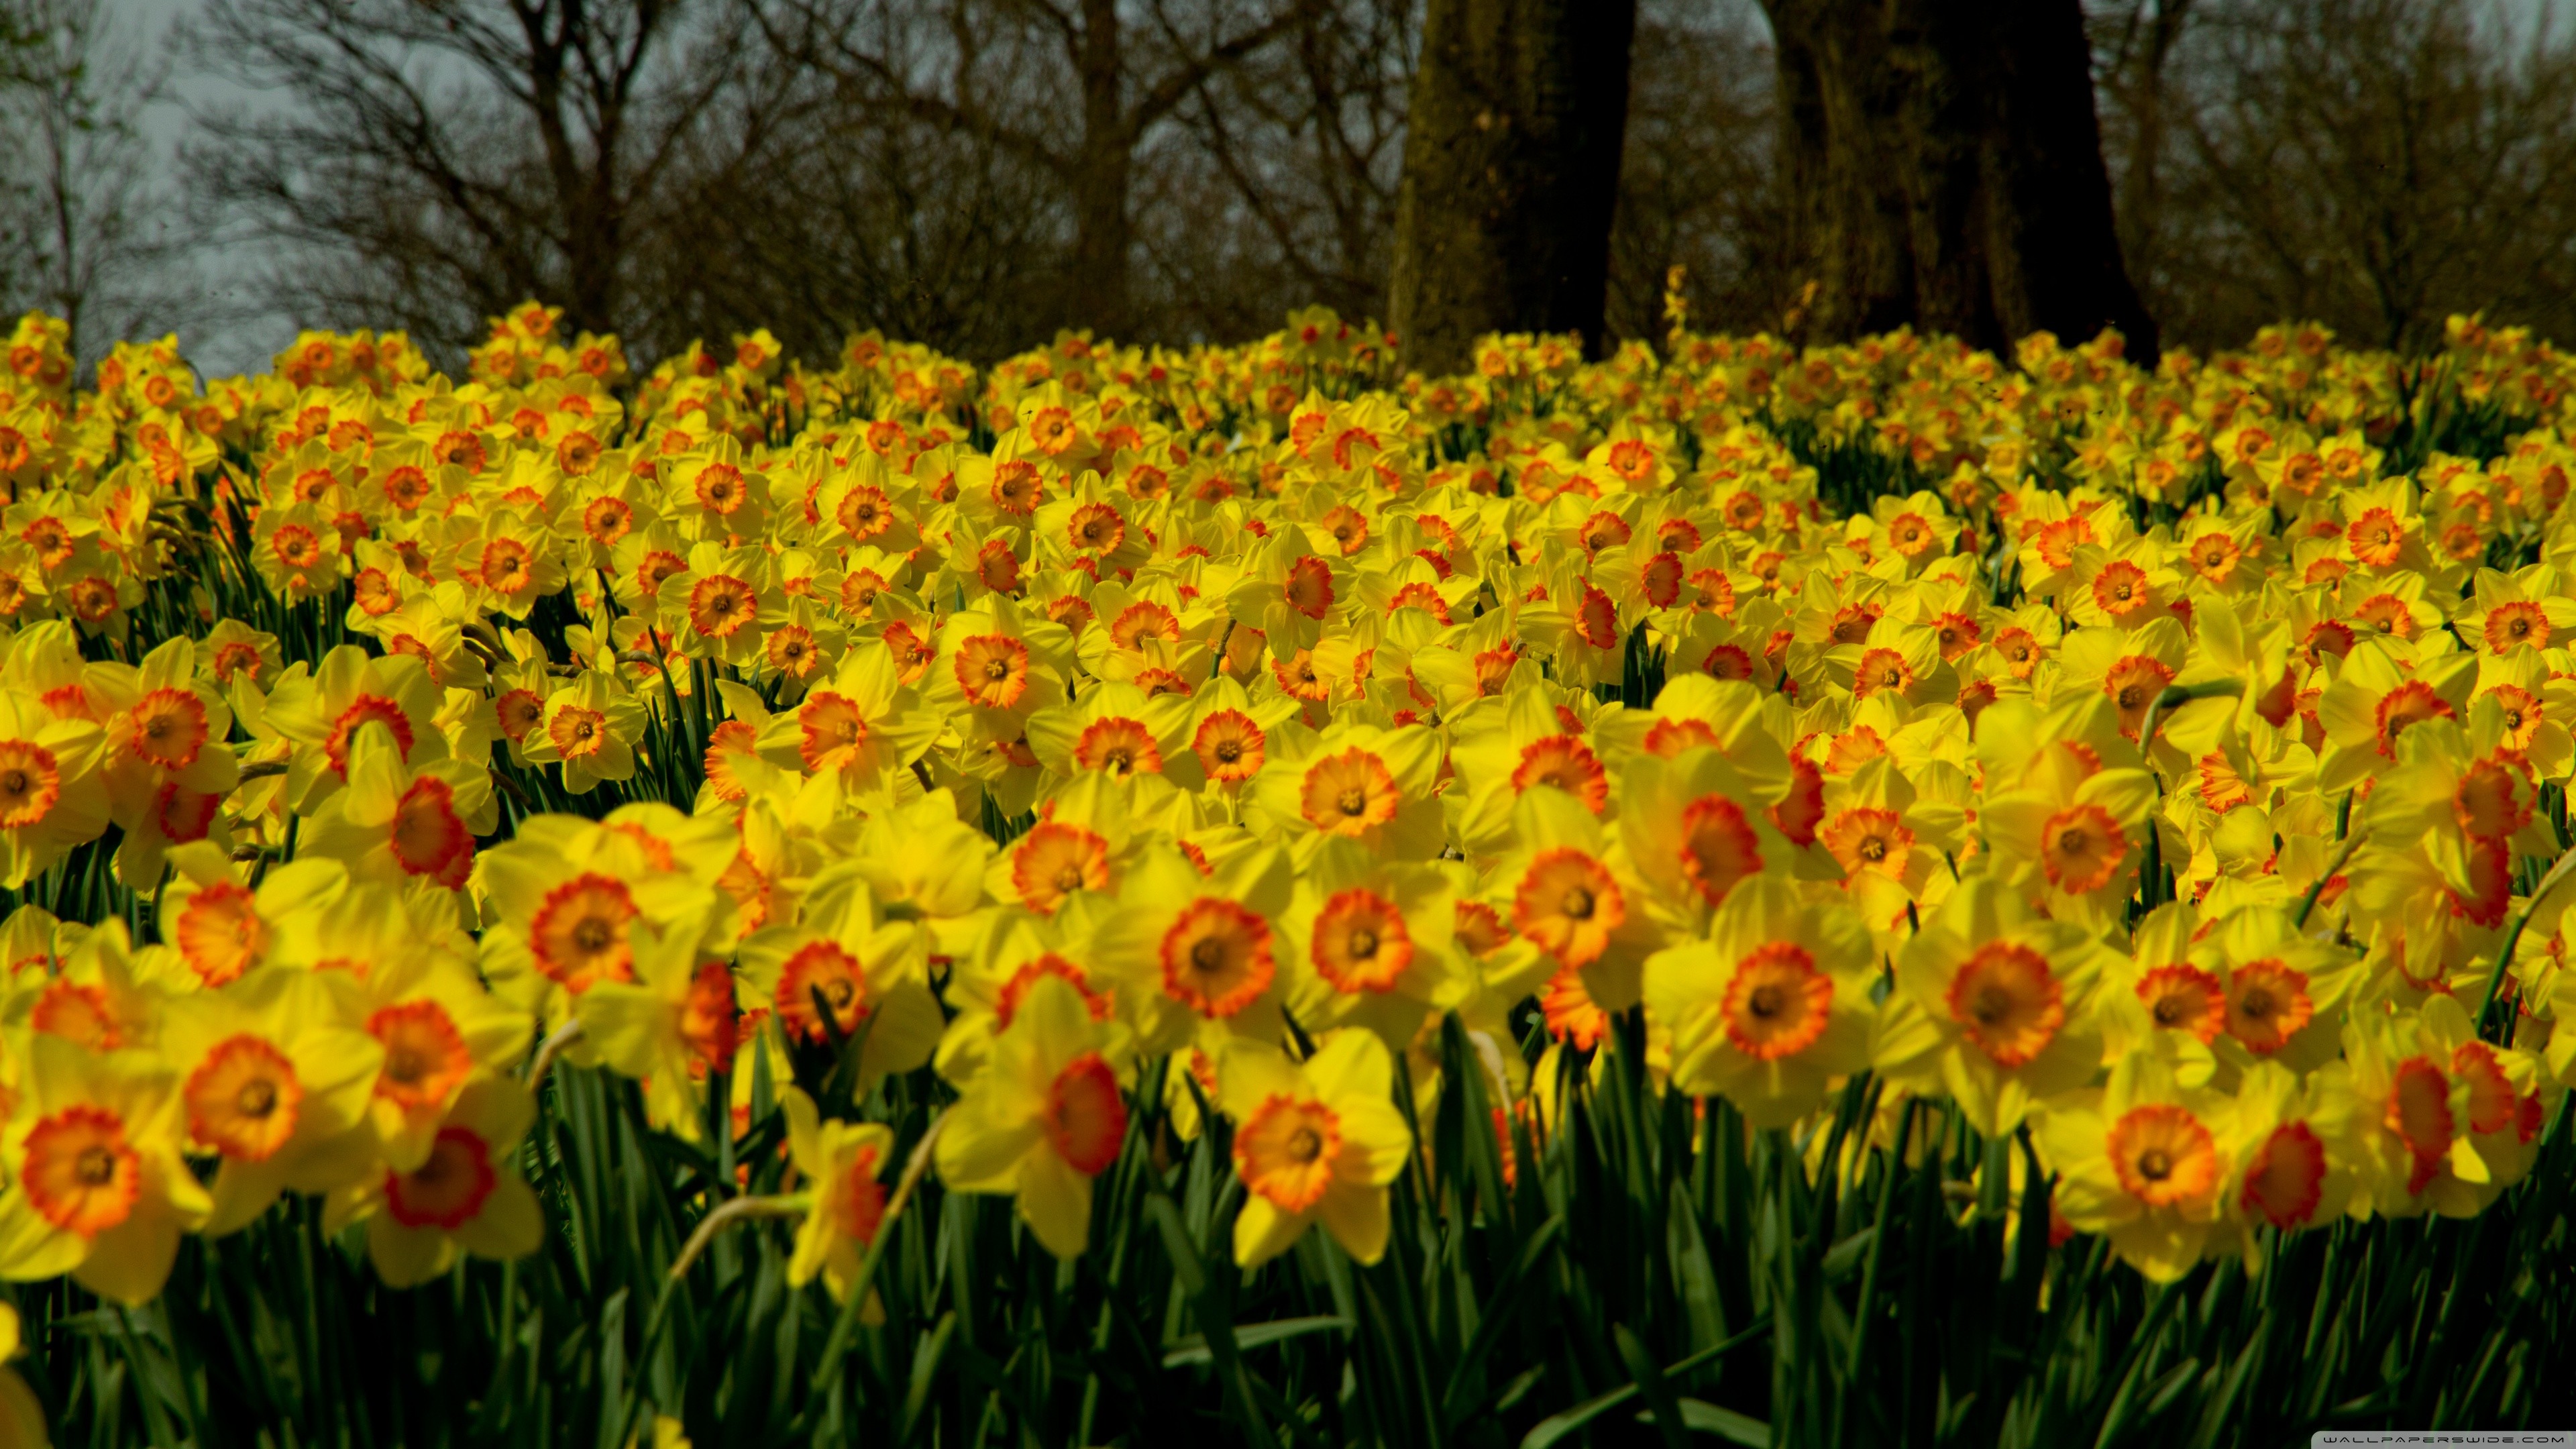 Daffodils Wallpaper 53 Pictures